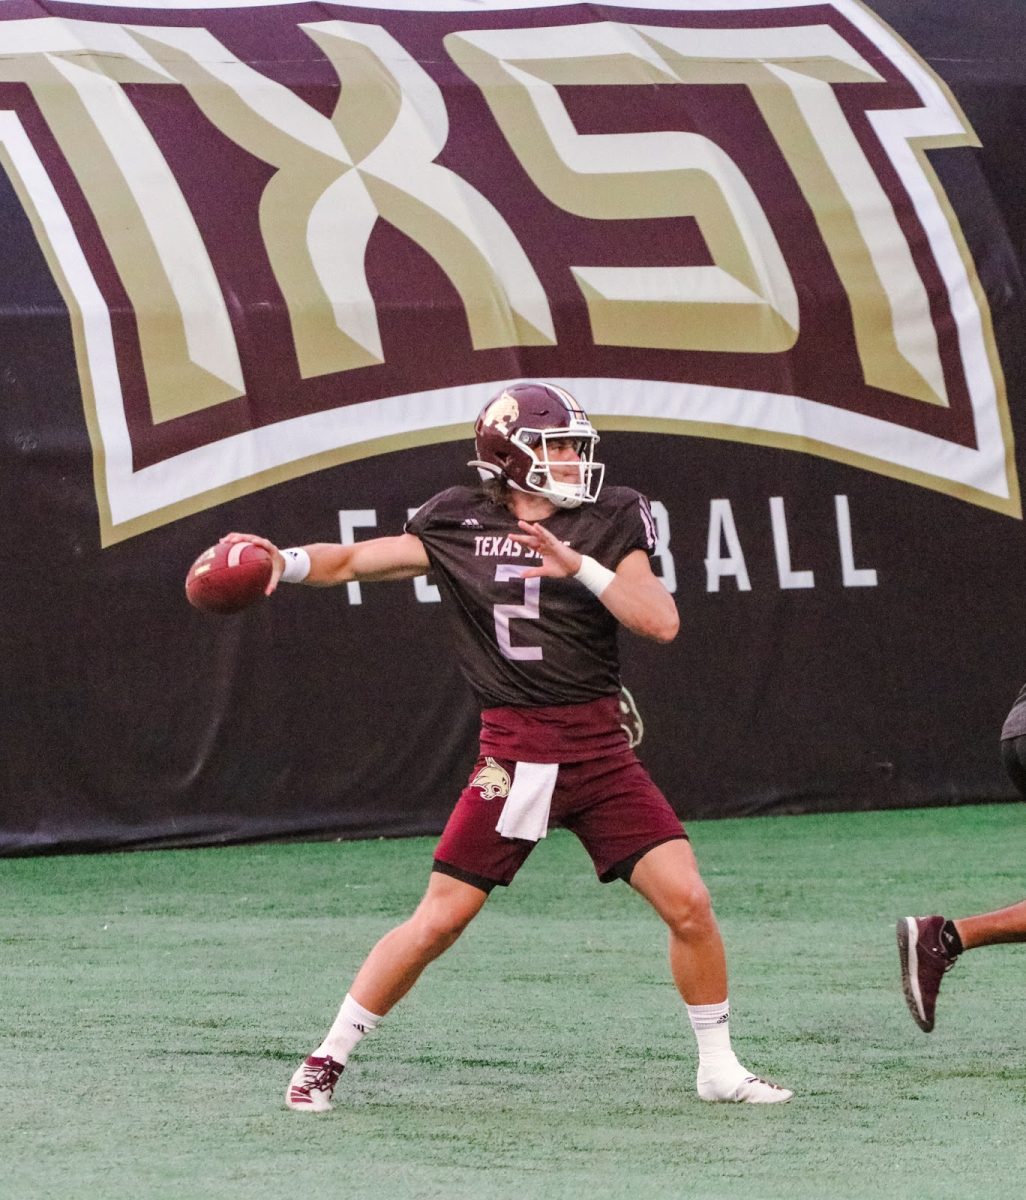 Texas+State+sophomore+quarterback+Brady+McBride+gets+ready+to+throw+the+football+to+a+target+during+practice%2C+Tuesday%2C+Sept.+29%2C+2020%2C+at+Bobcat+Stadium.